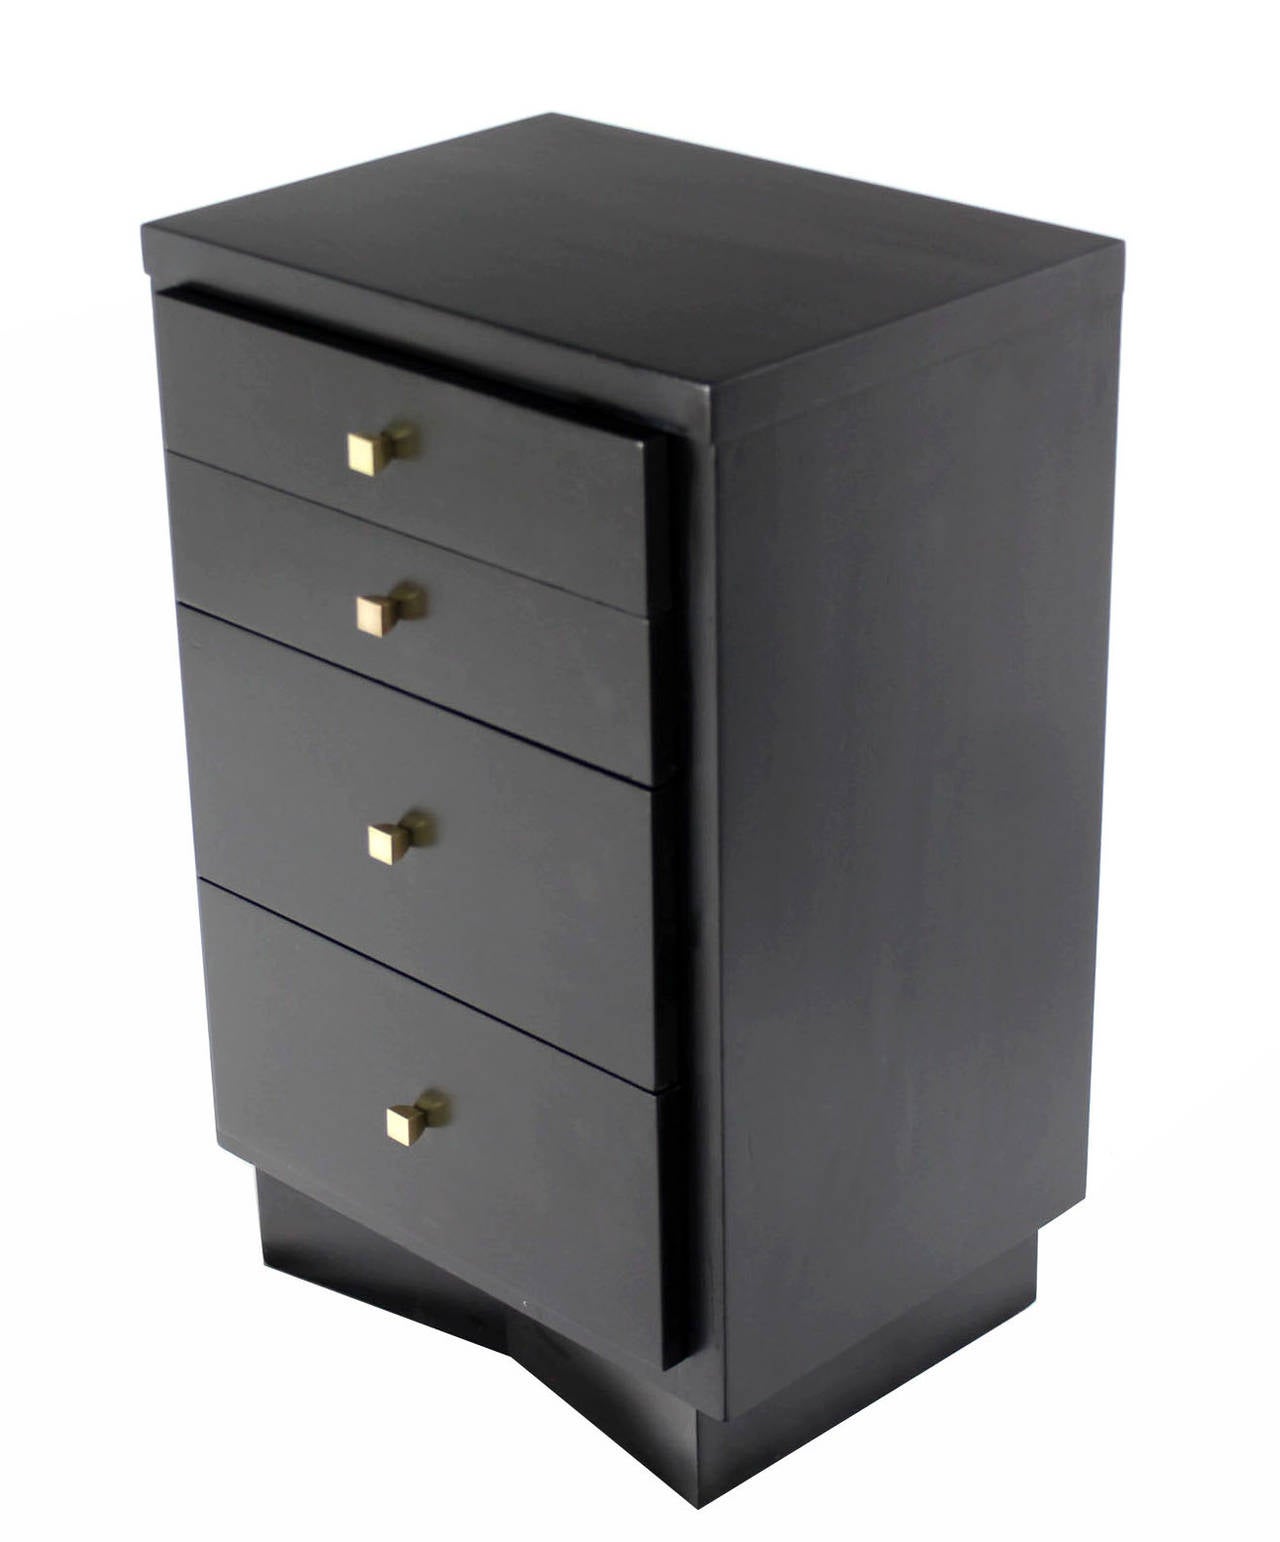 20th Century Pair of Black Lacquer, Four-Drawer Night Stands or End Tables